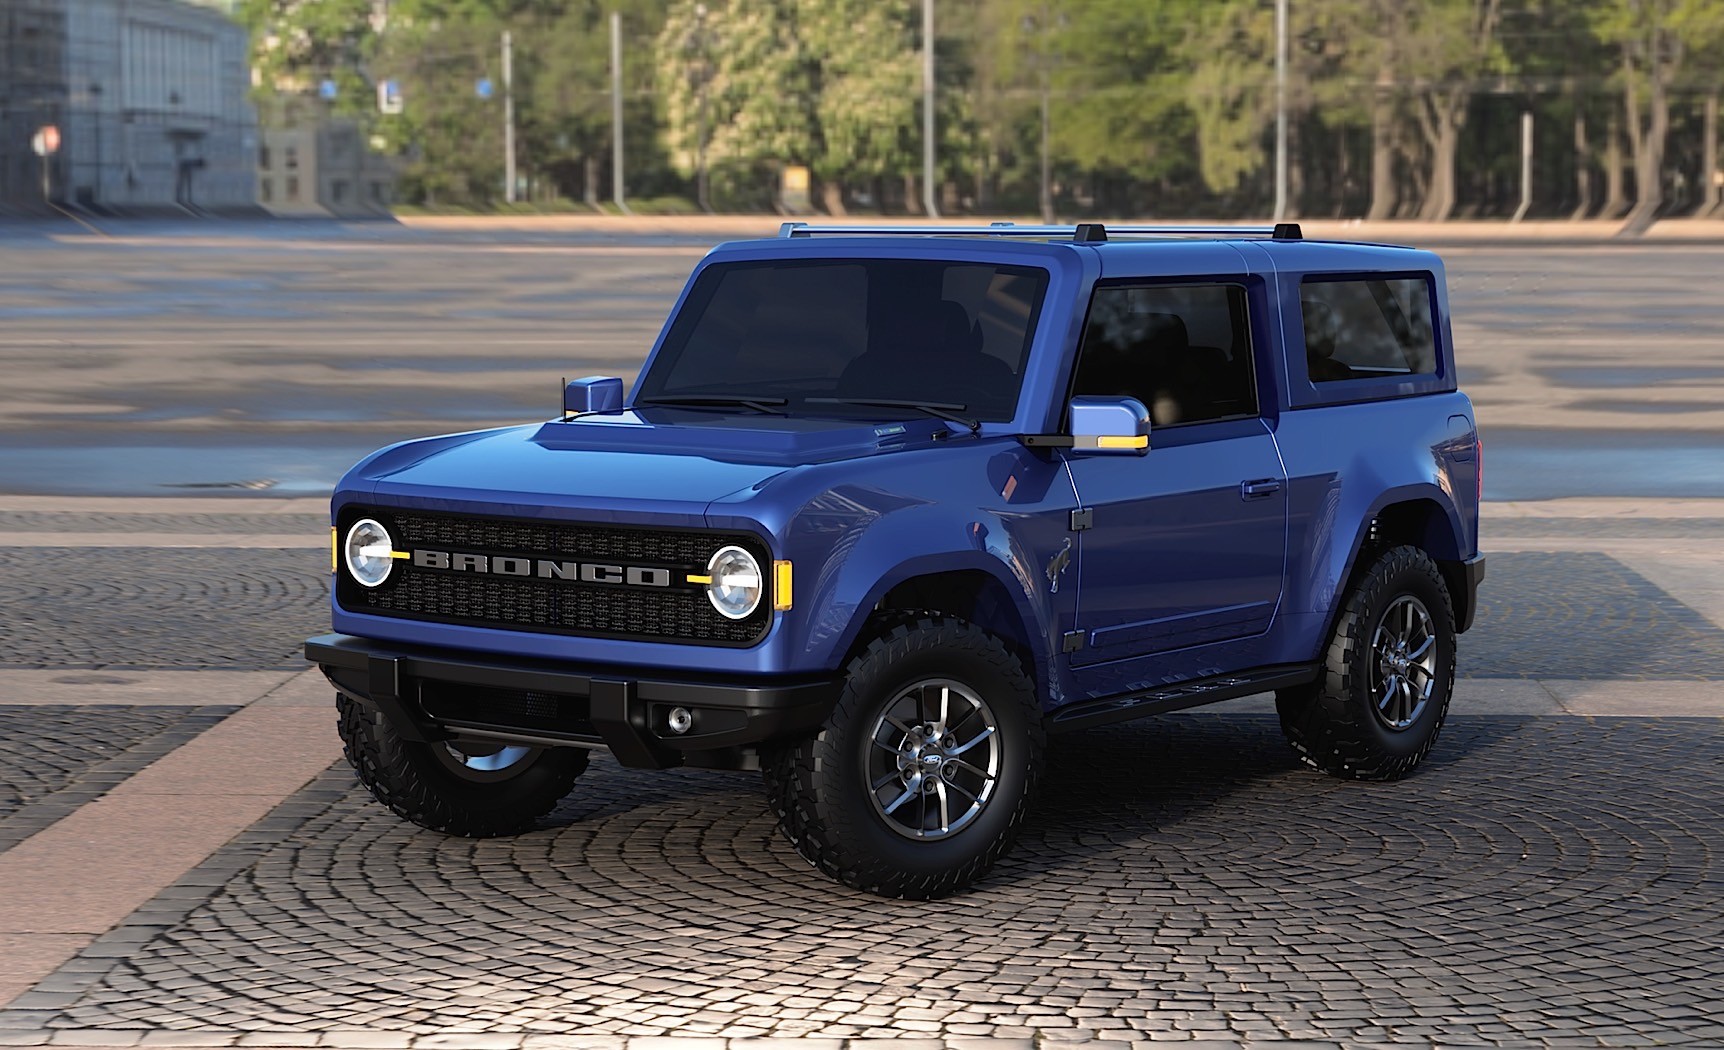 2021 Ford Bronco Images: This Is Pretty Much It - autoevolution